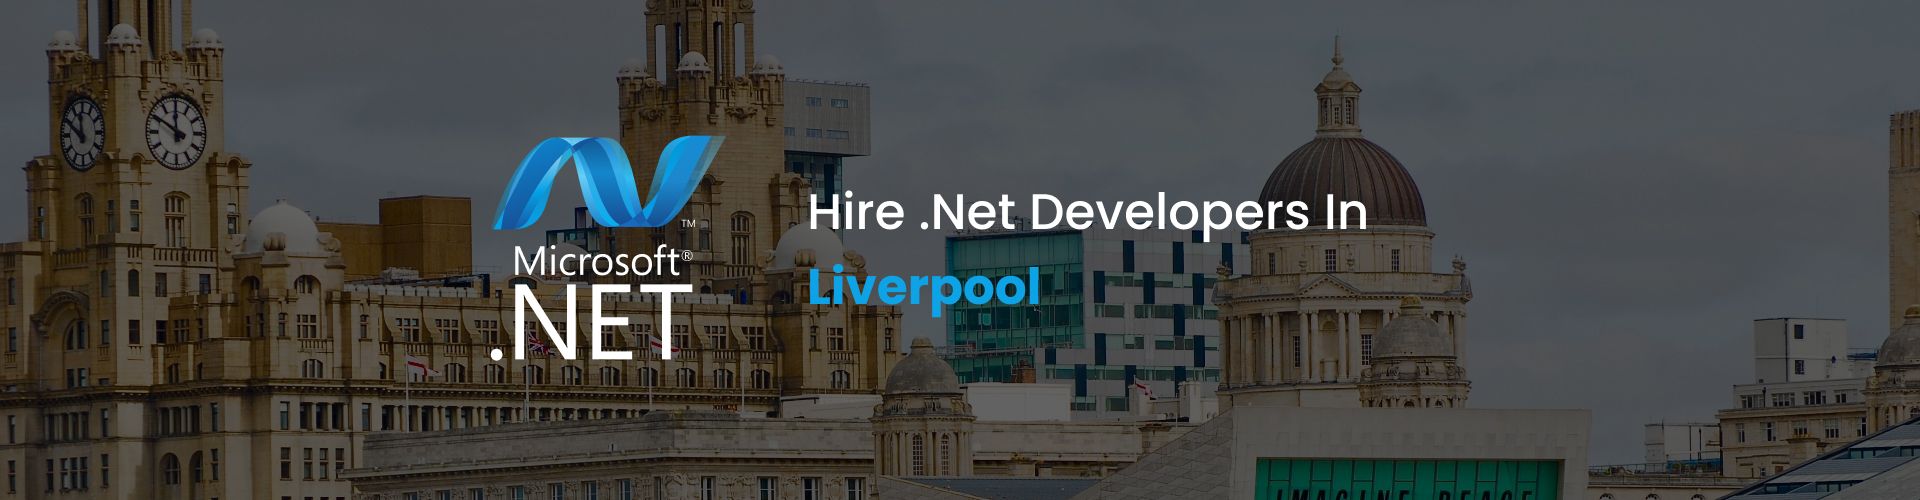 hire dot net developers in liverpool